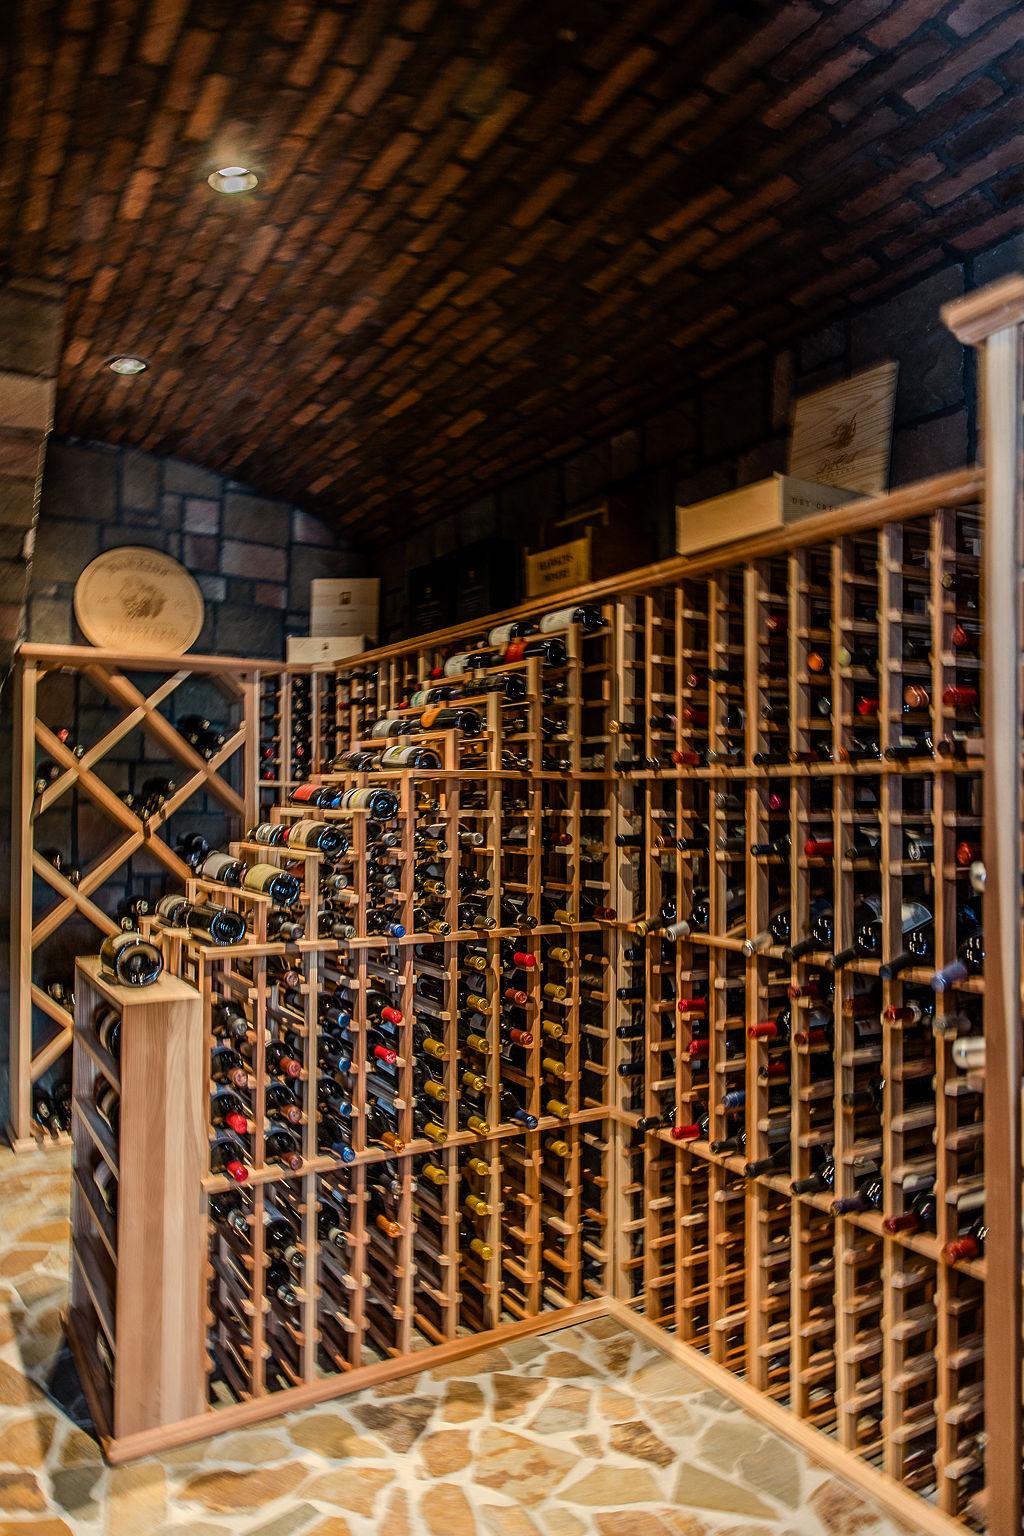 A wine rack with bottles on it

Description automatically generated